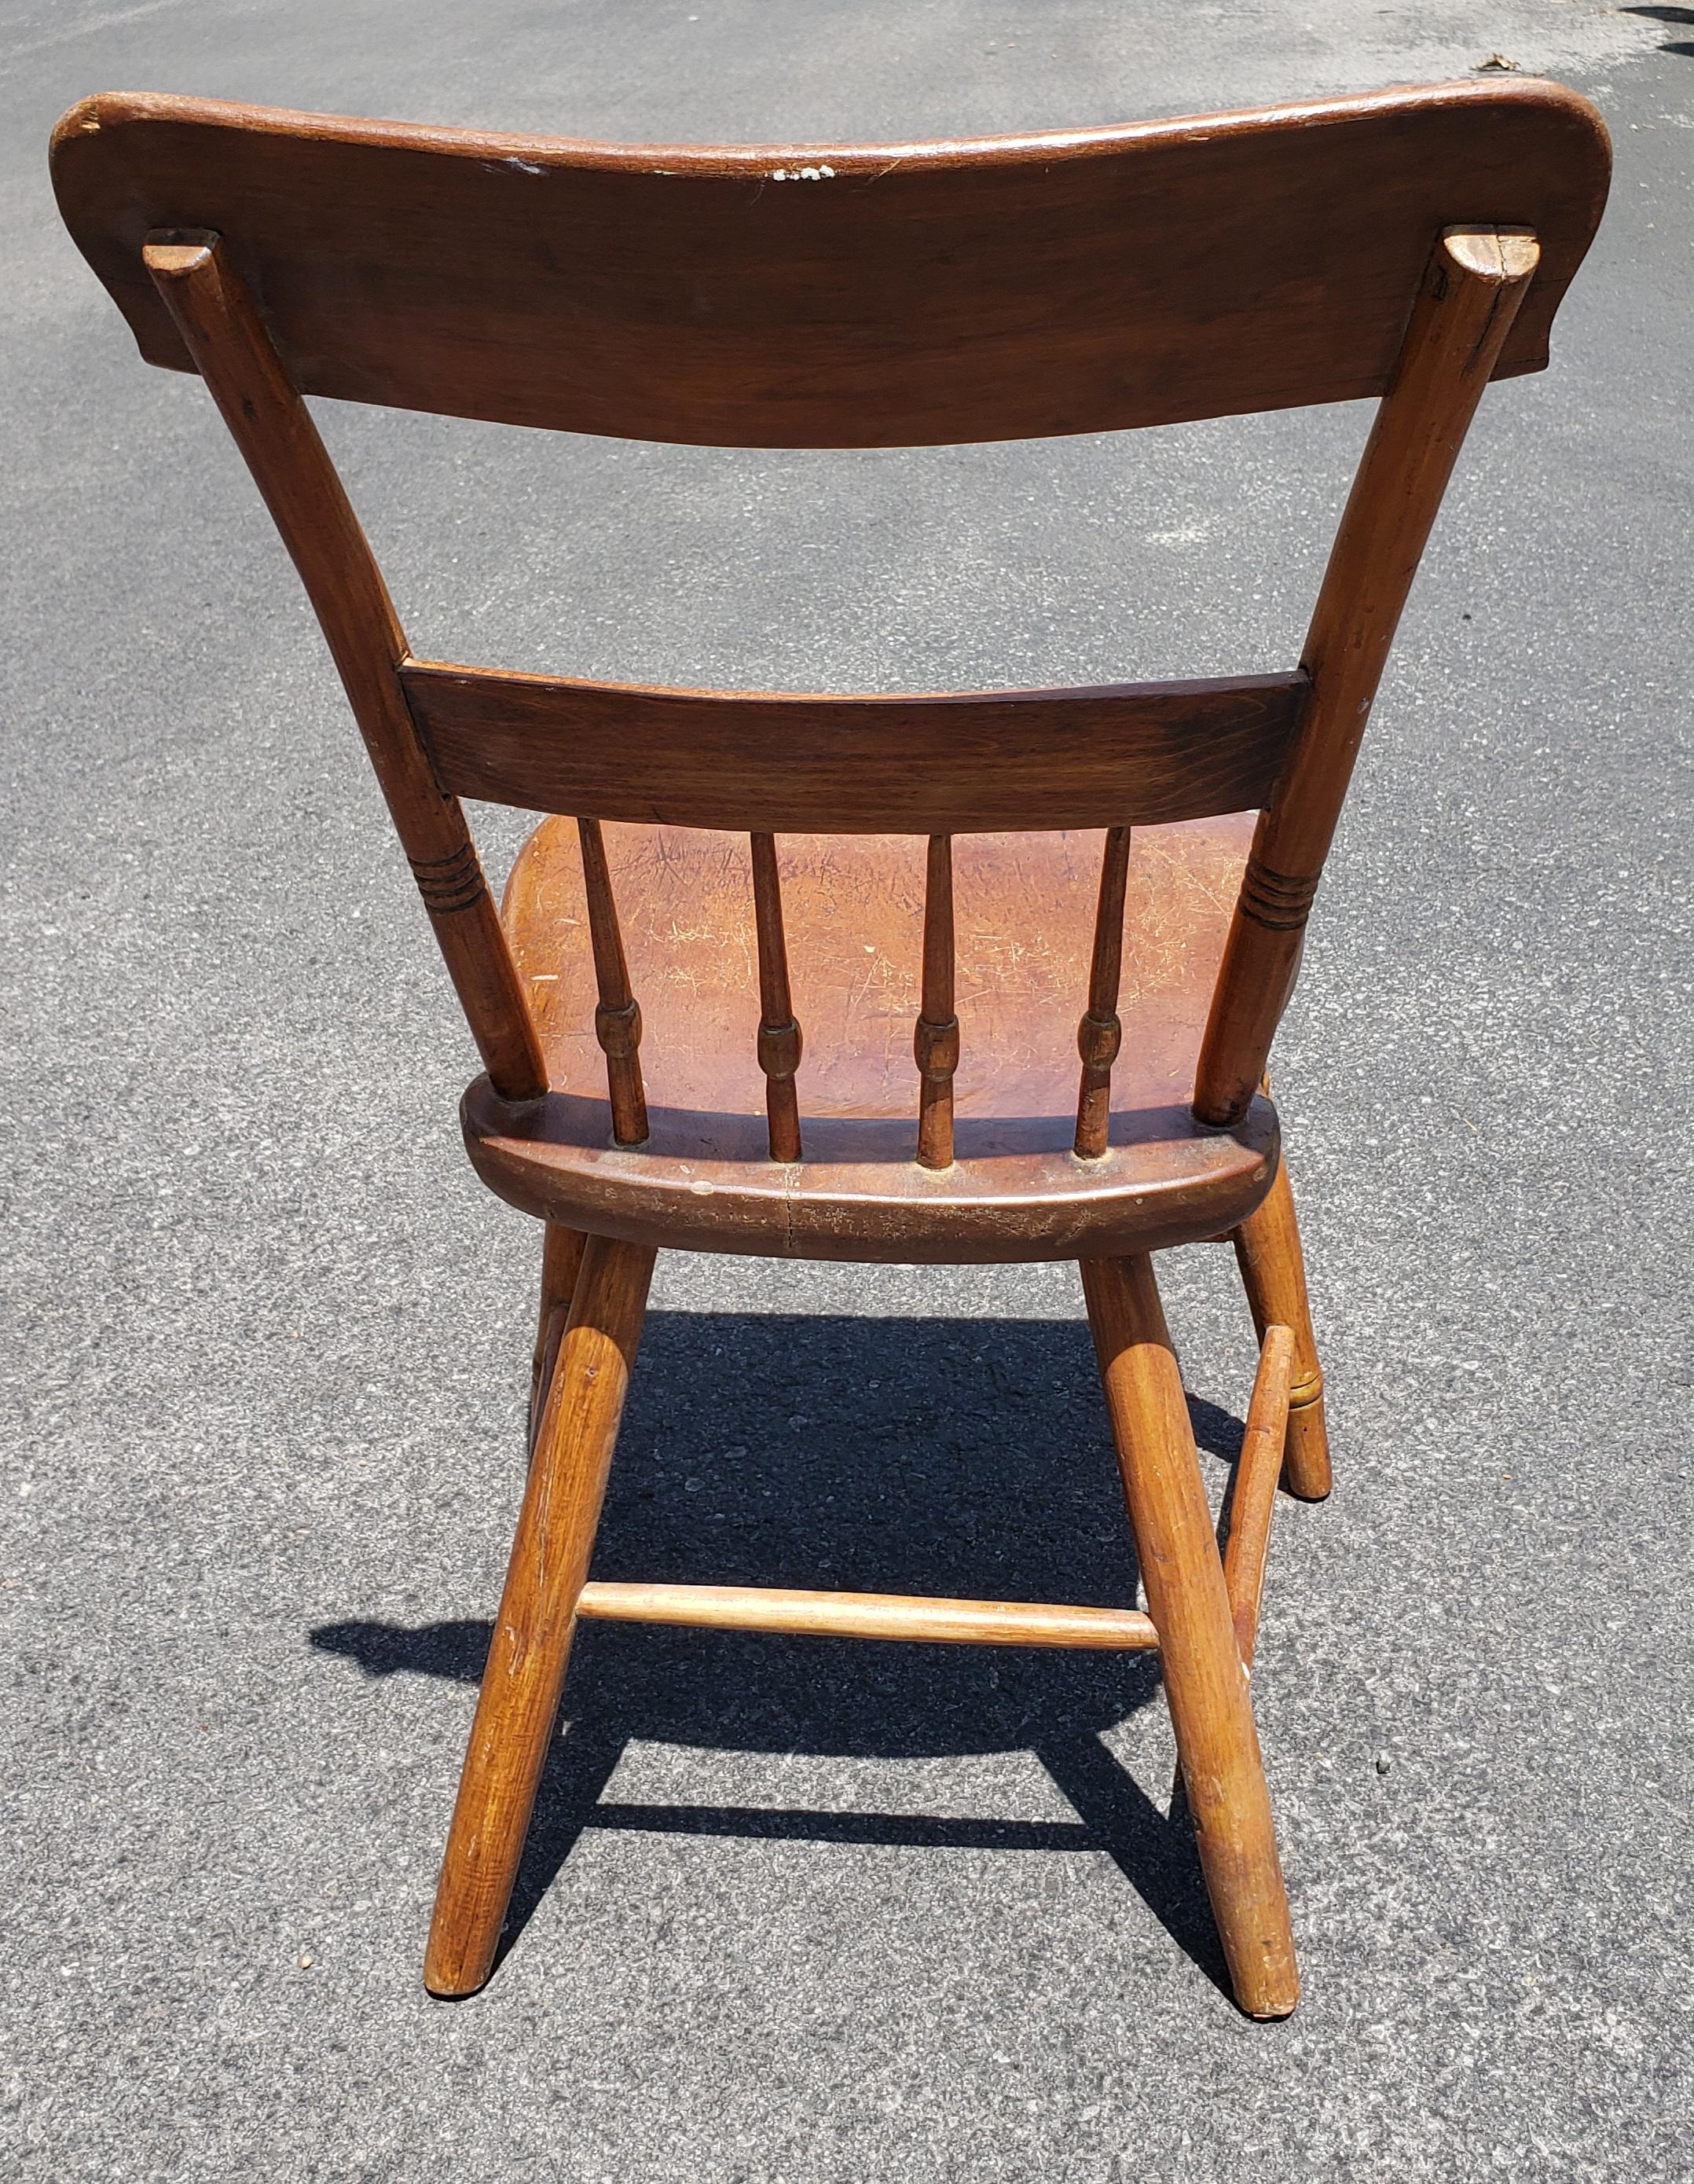 Late 19th Century Early American  HandCrafted Maple Plank Chair For Sale 3